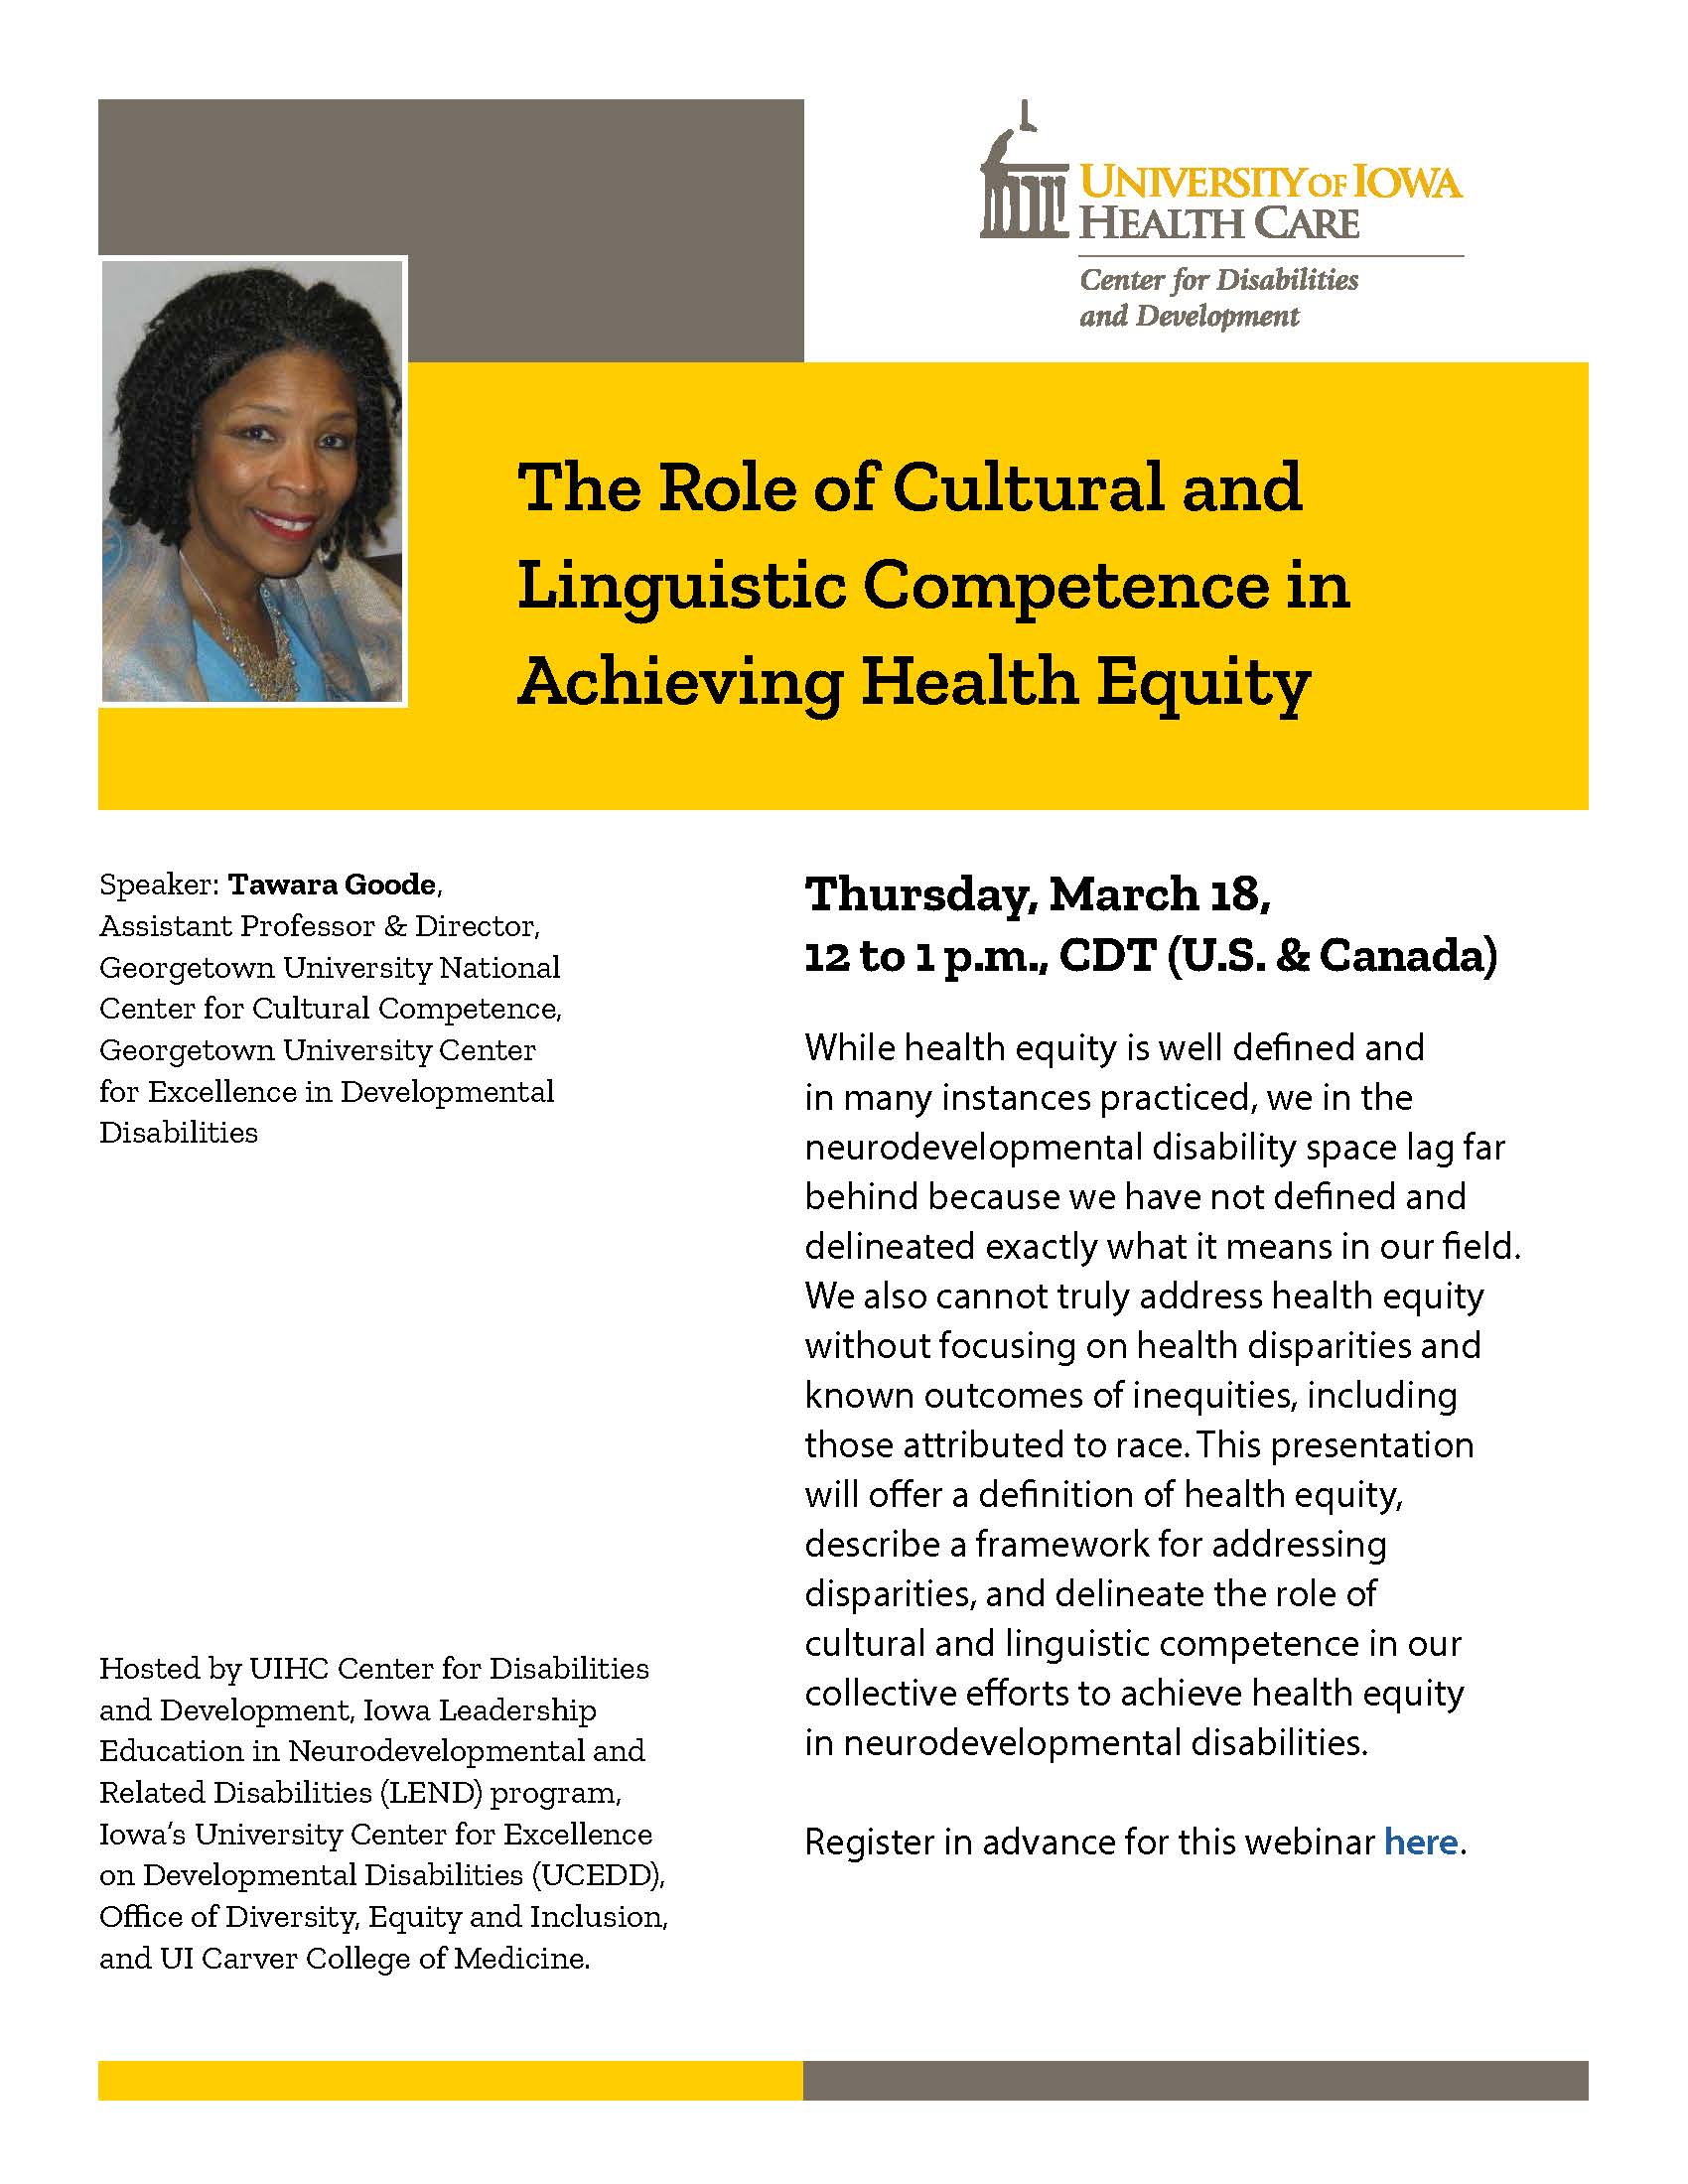 The Role of Cultural and Linguistic Competence in Achieving Health Equity promotional image